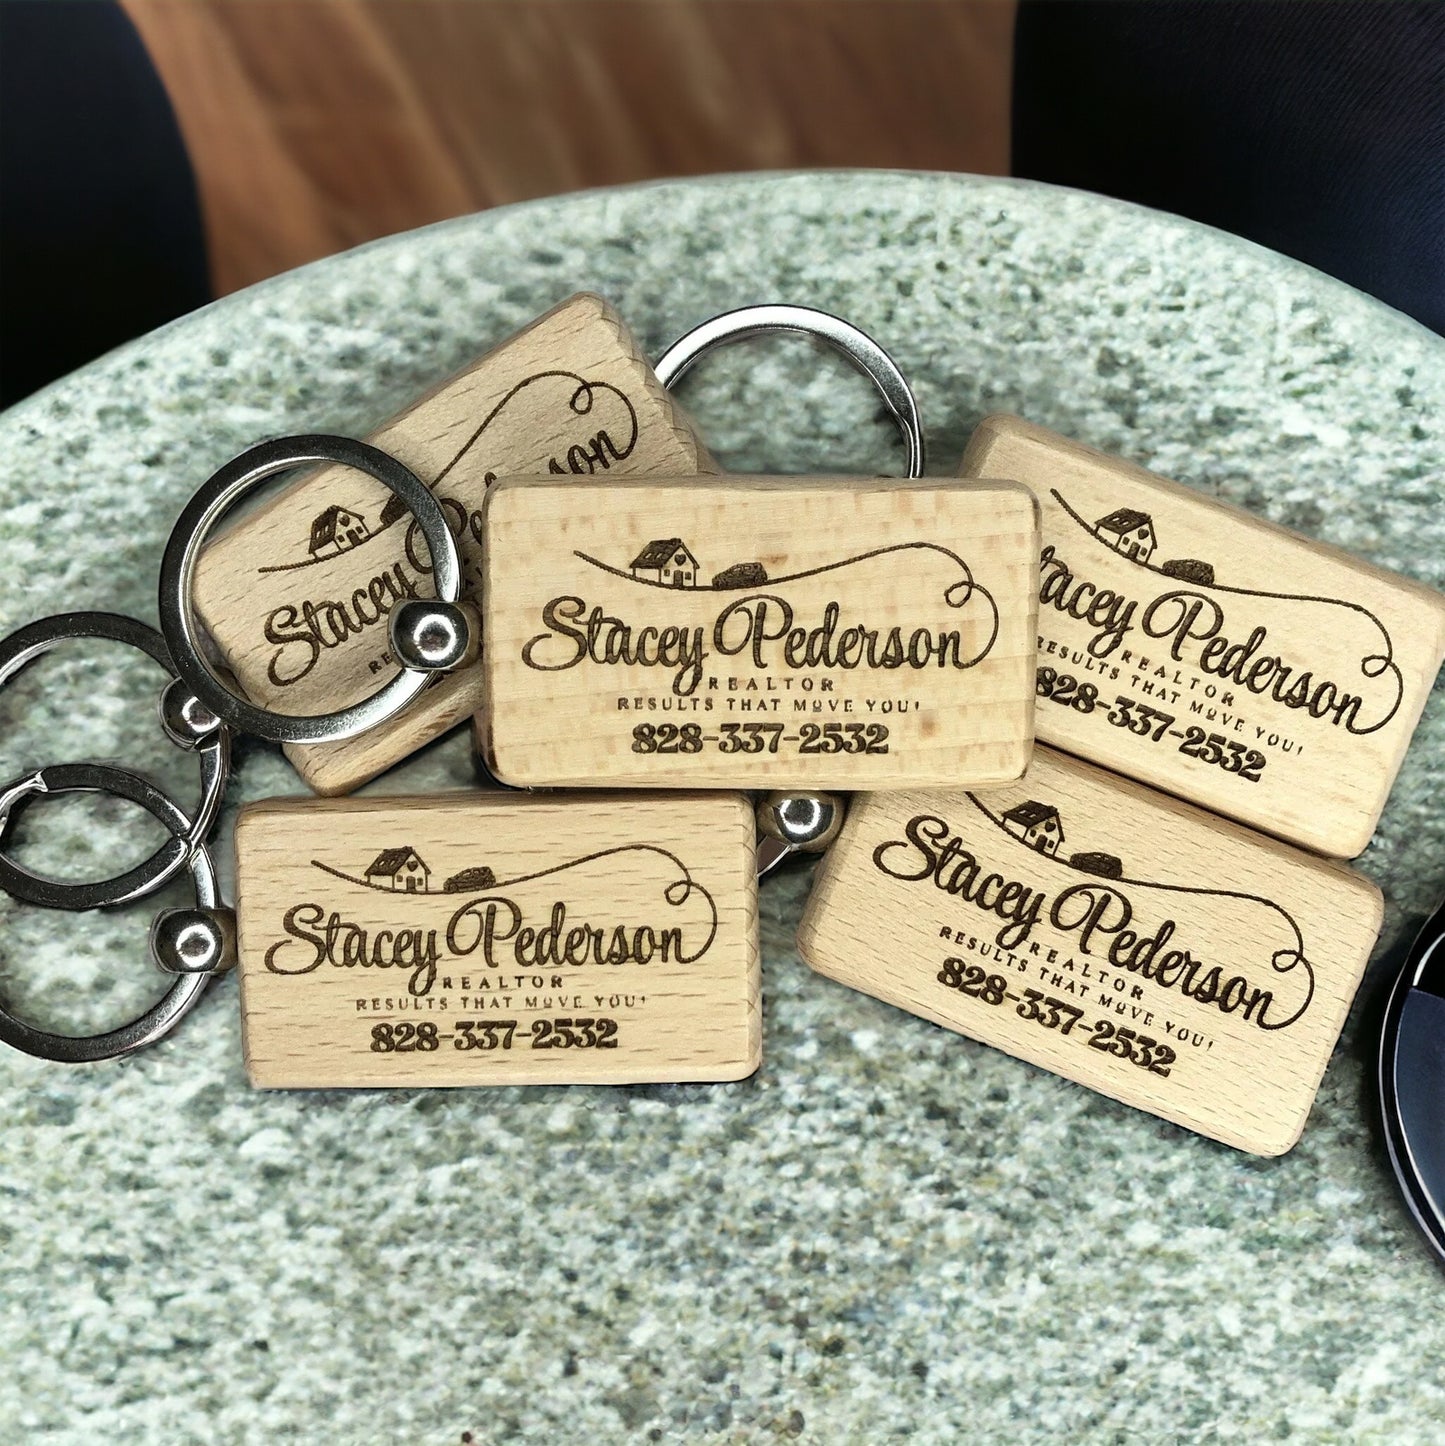 Custom Logo Engraved Wood Keychains - Rectangle, Circle or Square Shape Available - Bulk Discounts!